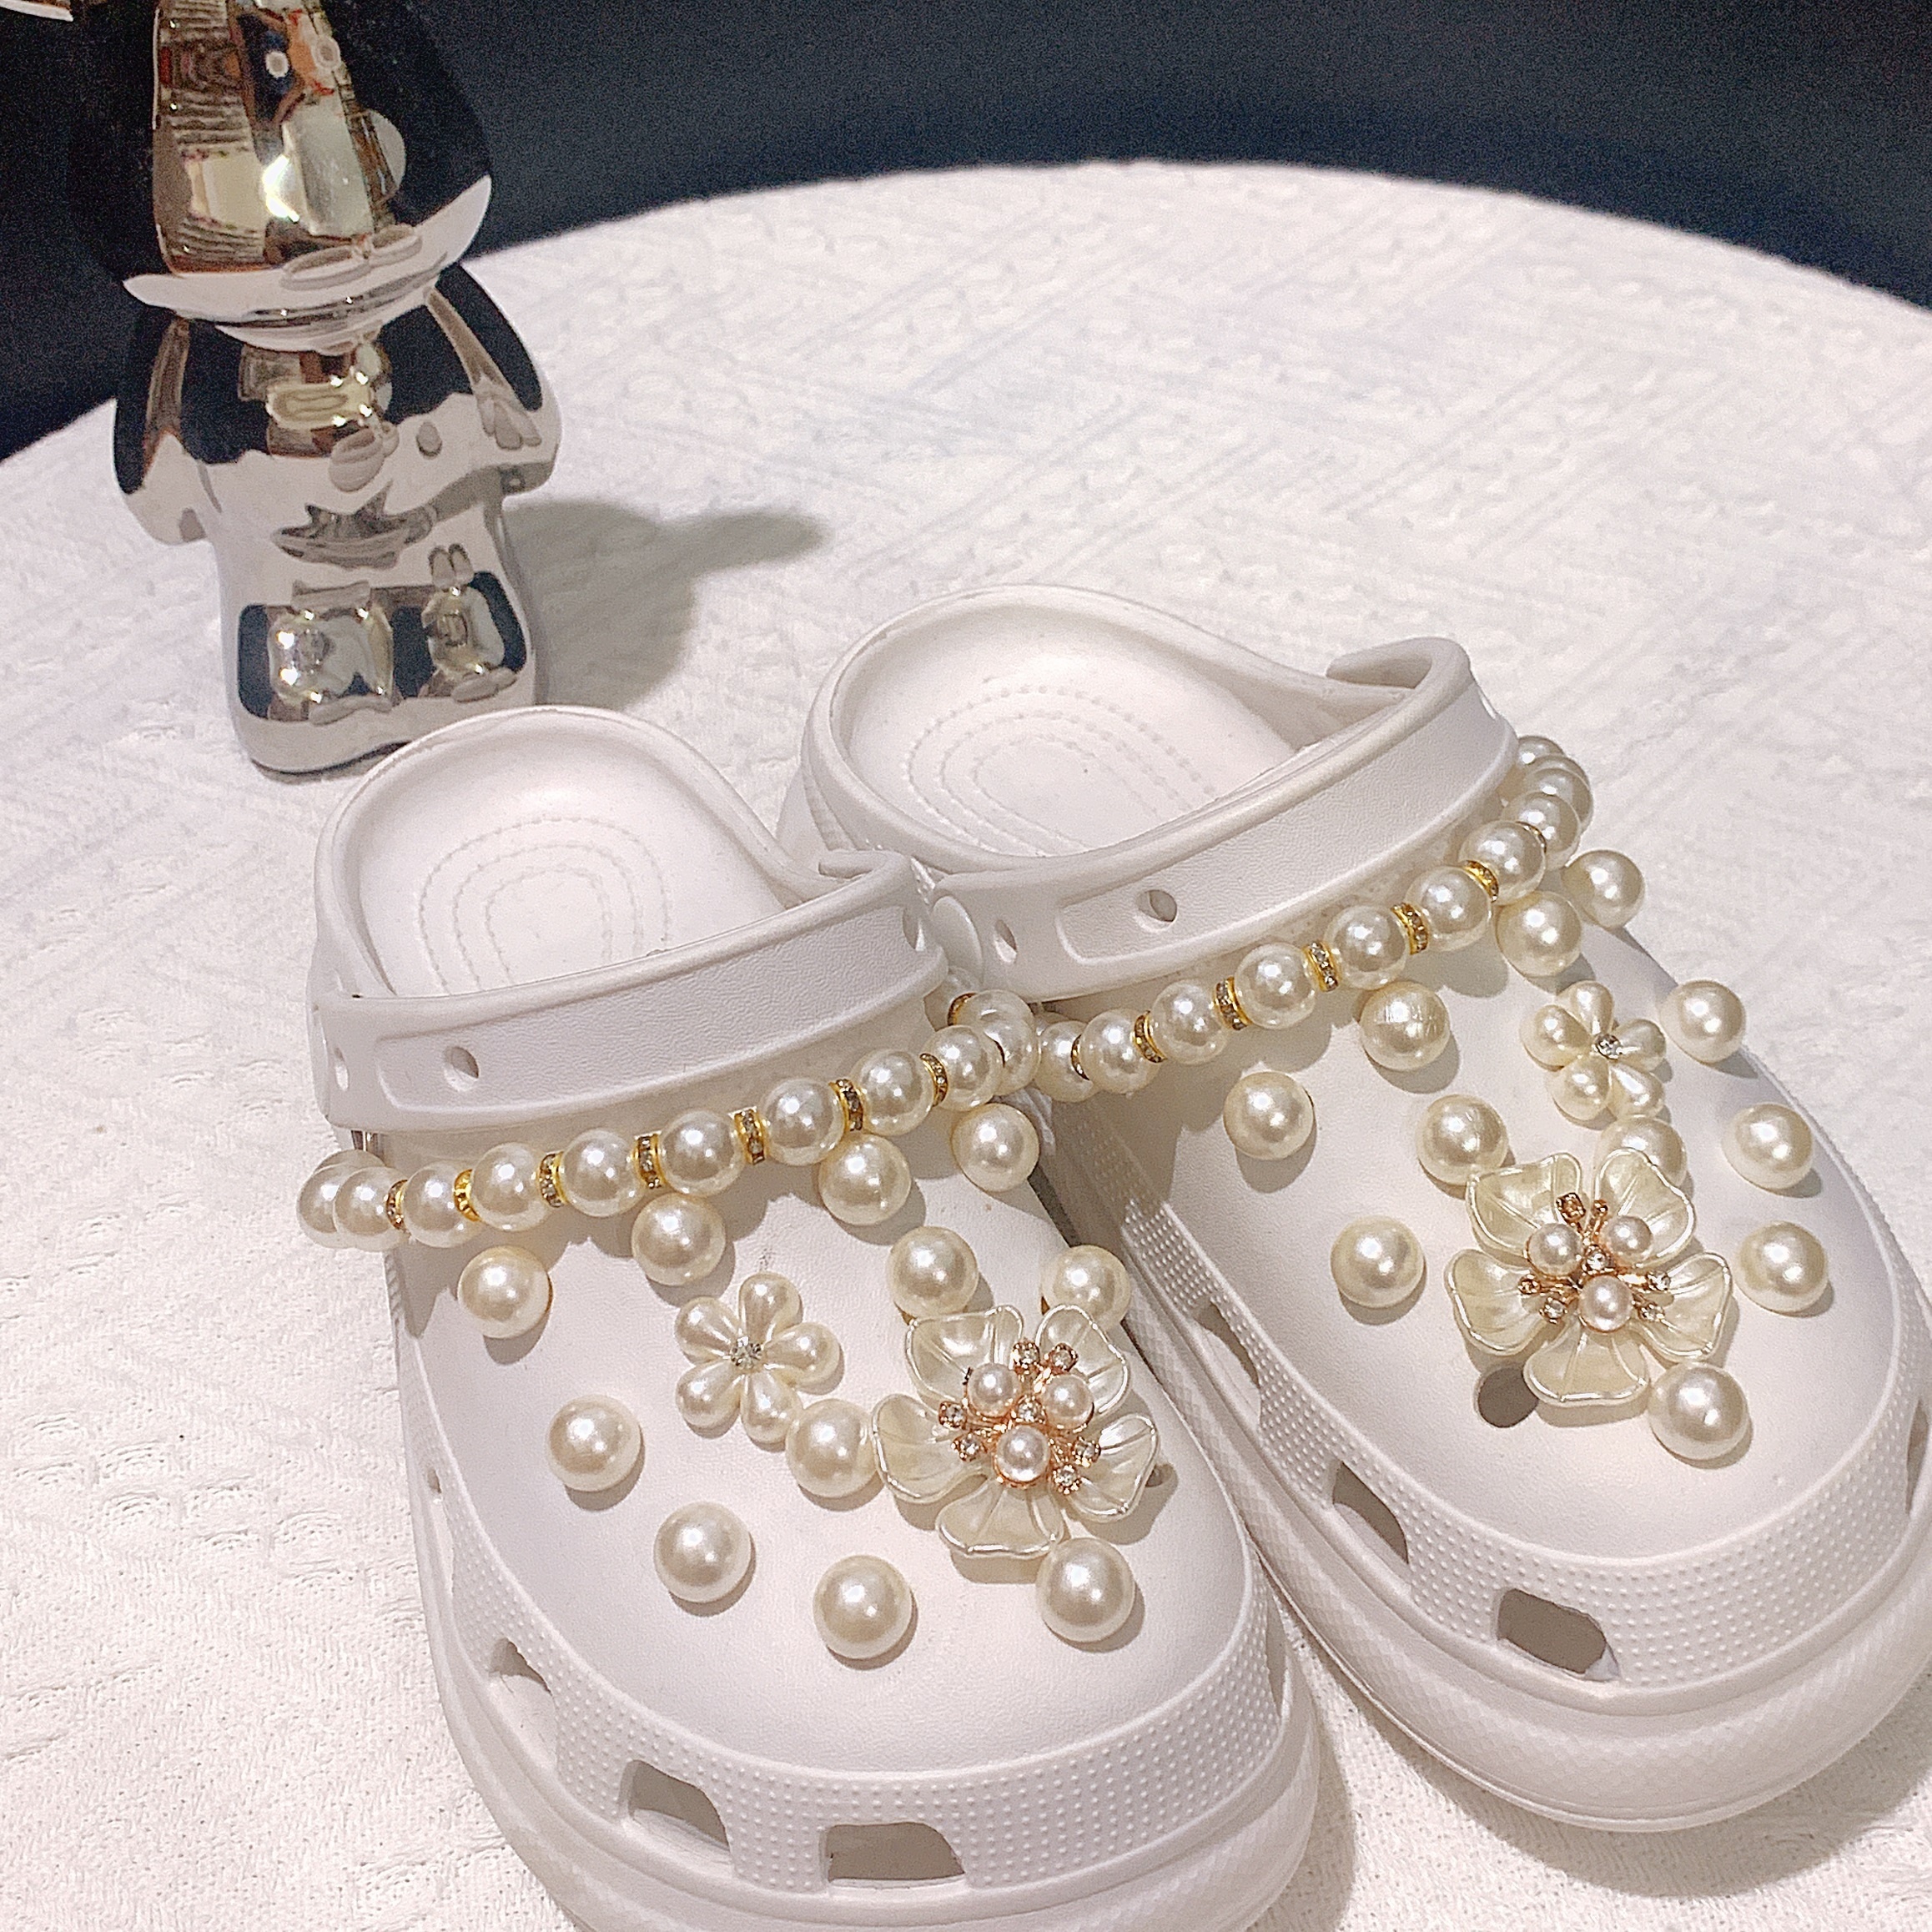 Trendy Chains Croc Charms Designer DIY Cute Rhinestone Shoes Decaration  Jibb for Croc Clogs Buckle Kids Girls Women Gifts